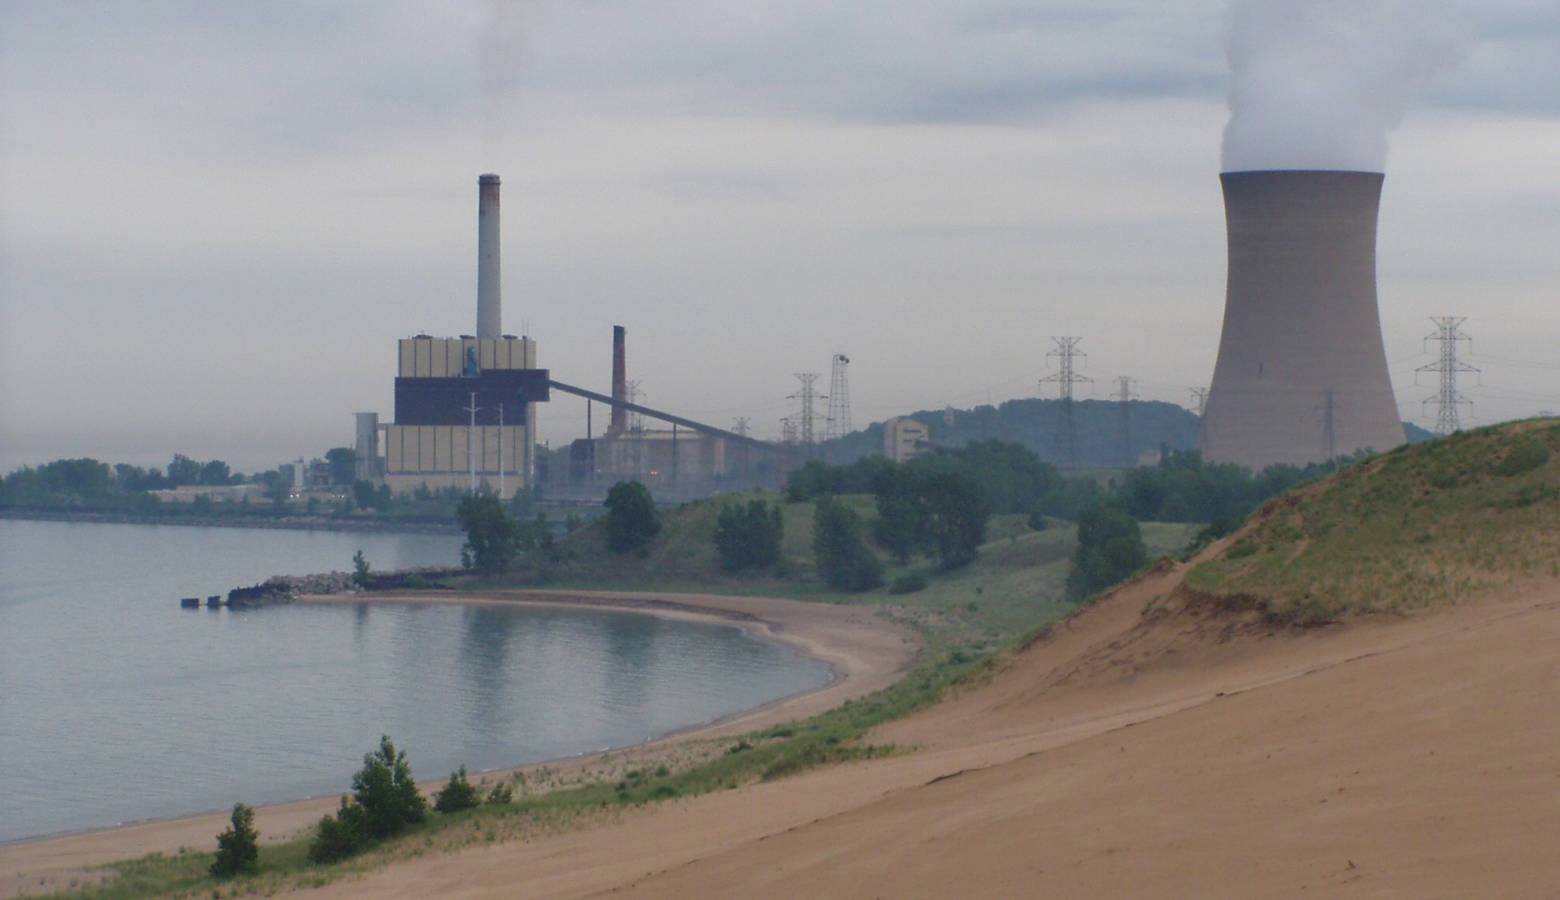 NIPSCO plans to shutter its Michigan City coal plant, seen here, as well as its Schahfer plant. (Chris Light/Wikimedia Commons)